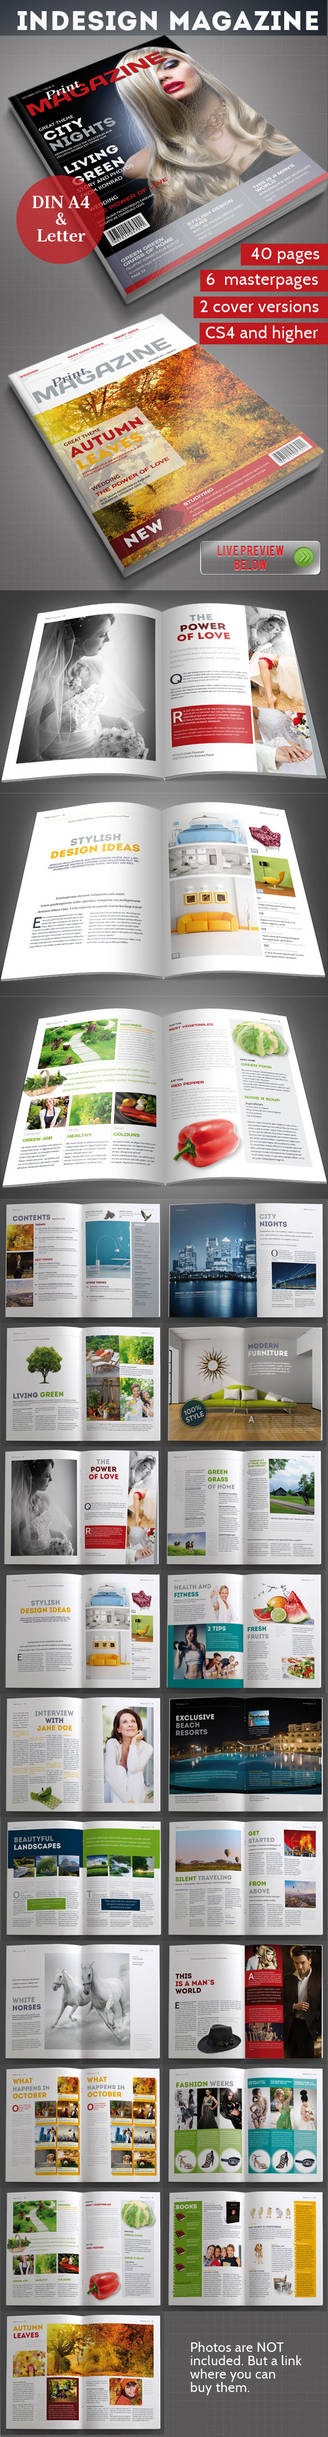 40 pages magazine